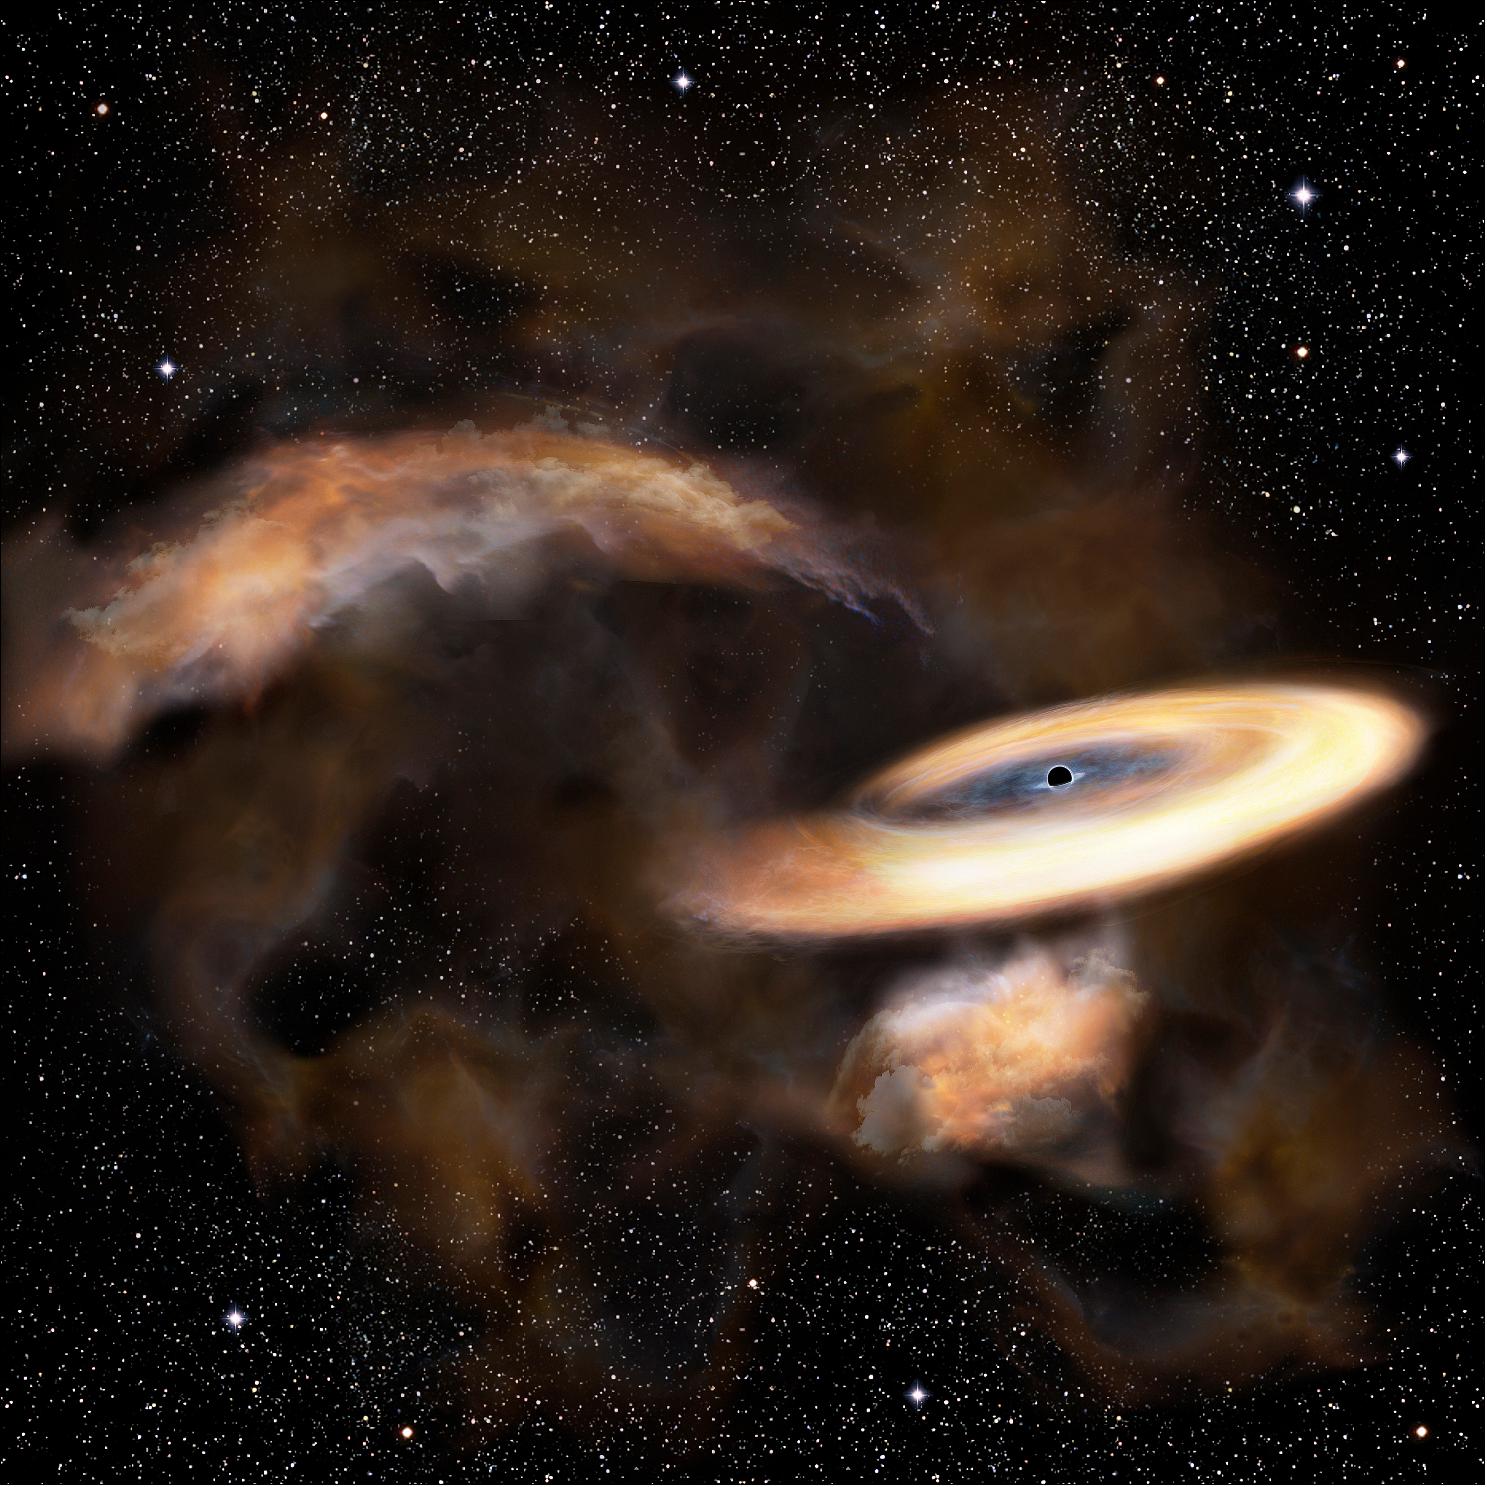 Figure 99: Artist’s impression of a gas cloud swirling around a black hole [image credit: NAOJ (National Astronomical Observatory of Japan)]